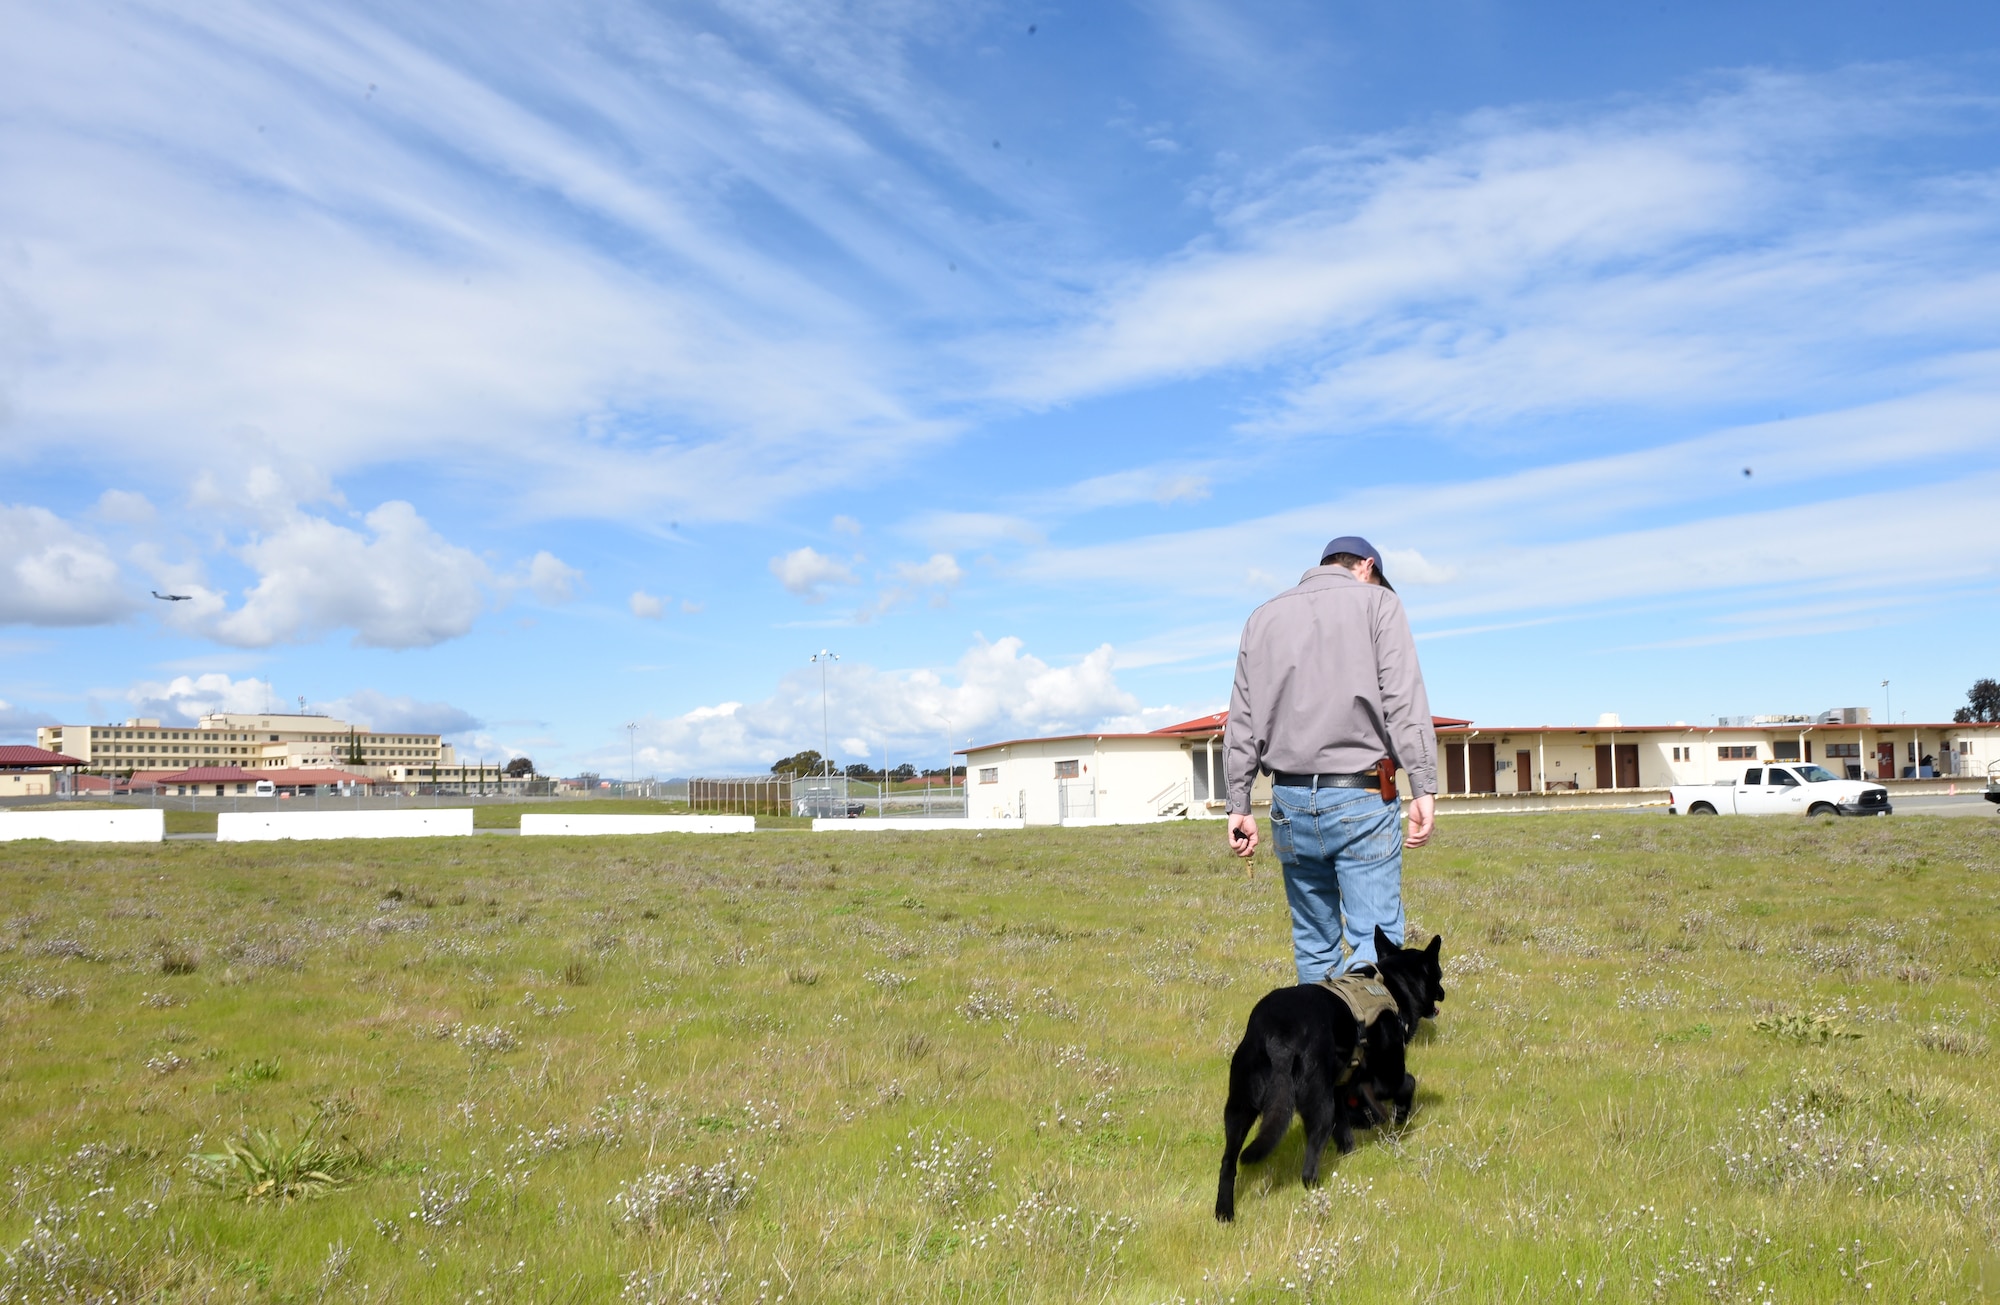 Matt Stevens, U.S. Department of Agriculture airport biologist, and Otto, the safety dog, patrol the areas around the flight line Feb. 20, 2019, at Travis Air Force Base, Calif. With more than 133 different bird species identified at Travis since July 2014, Otto and Matt play an important role in ensuring Travis’ C-17 Globemaster IIIs, KC-10 Extenders and C-5M Super Galaxies can complete their flying missions safely. (U.S. Air Force photo by Airman 1st Class Christian Conrad)